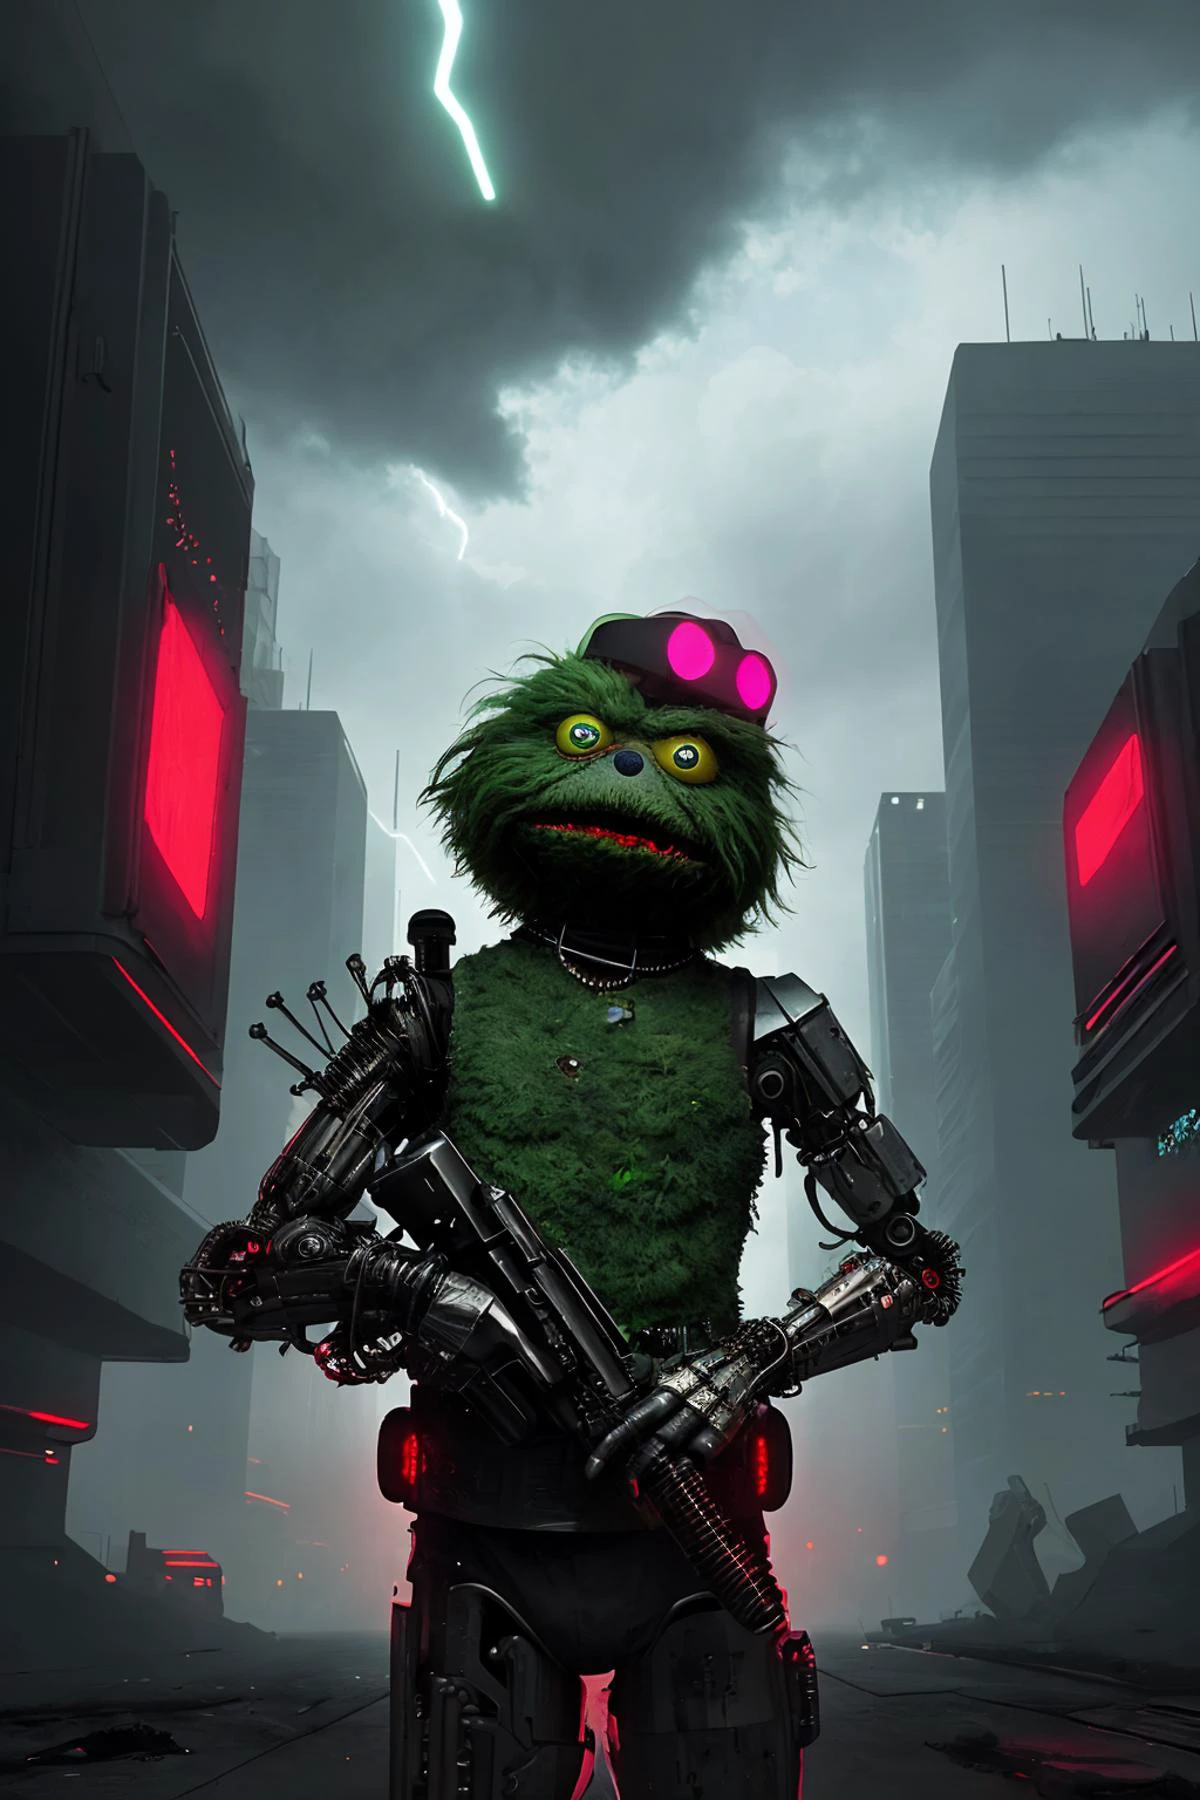 portrait of oscar the grouch as a cyborg in a cyberpunk setting, glowing red eyes, deadly intent, cute, frightening, dangerous, adorable, cloudy skies, smog